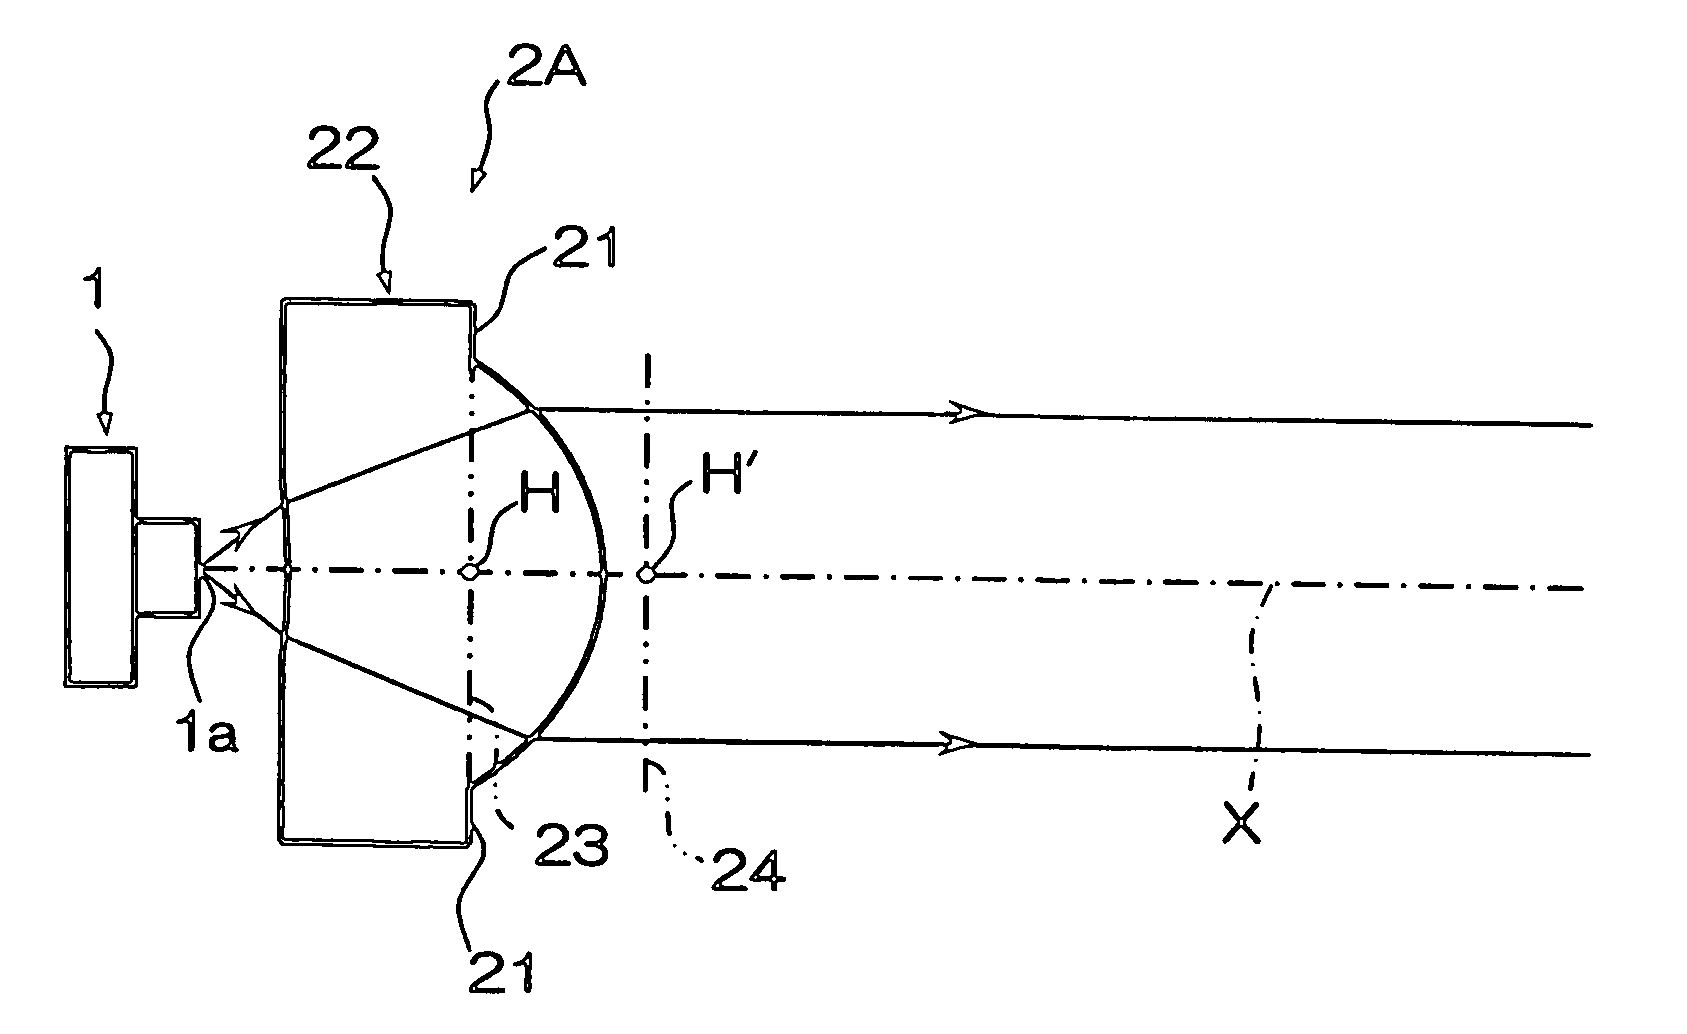 Lens with reference mounting surface